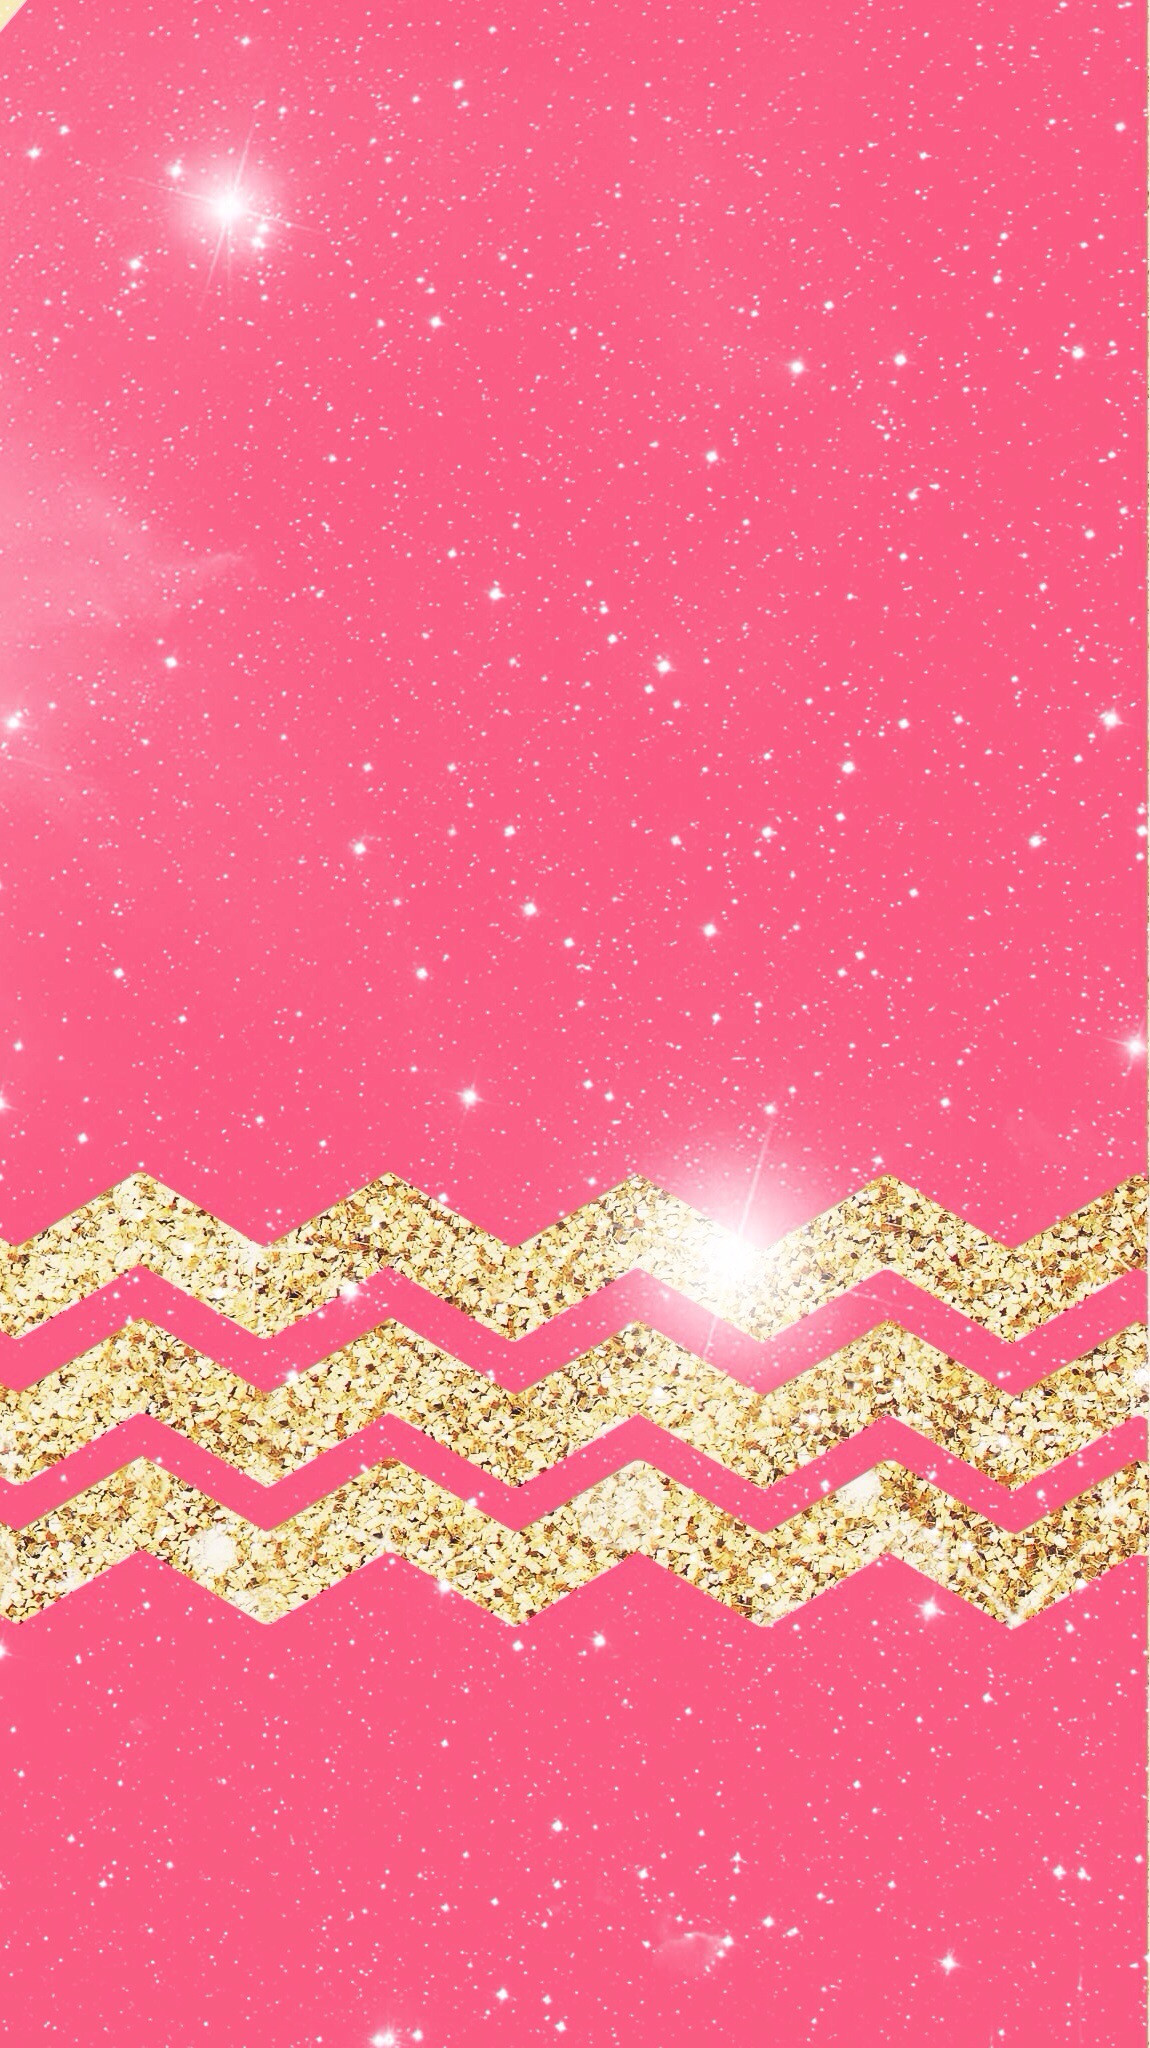 1150x2048 iPhone wallpaper pink and gold